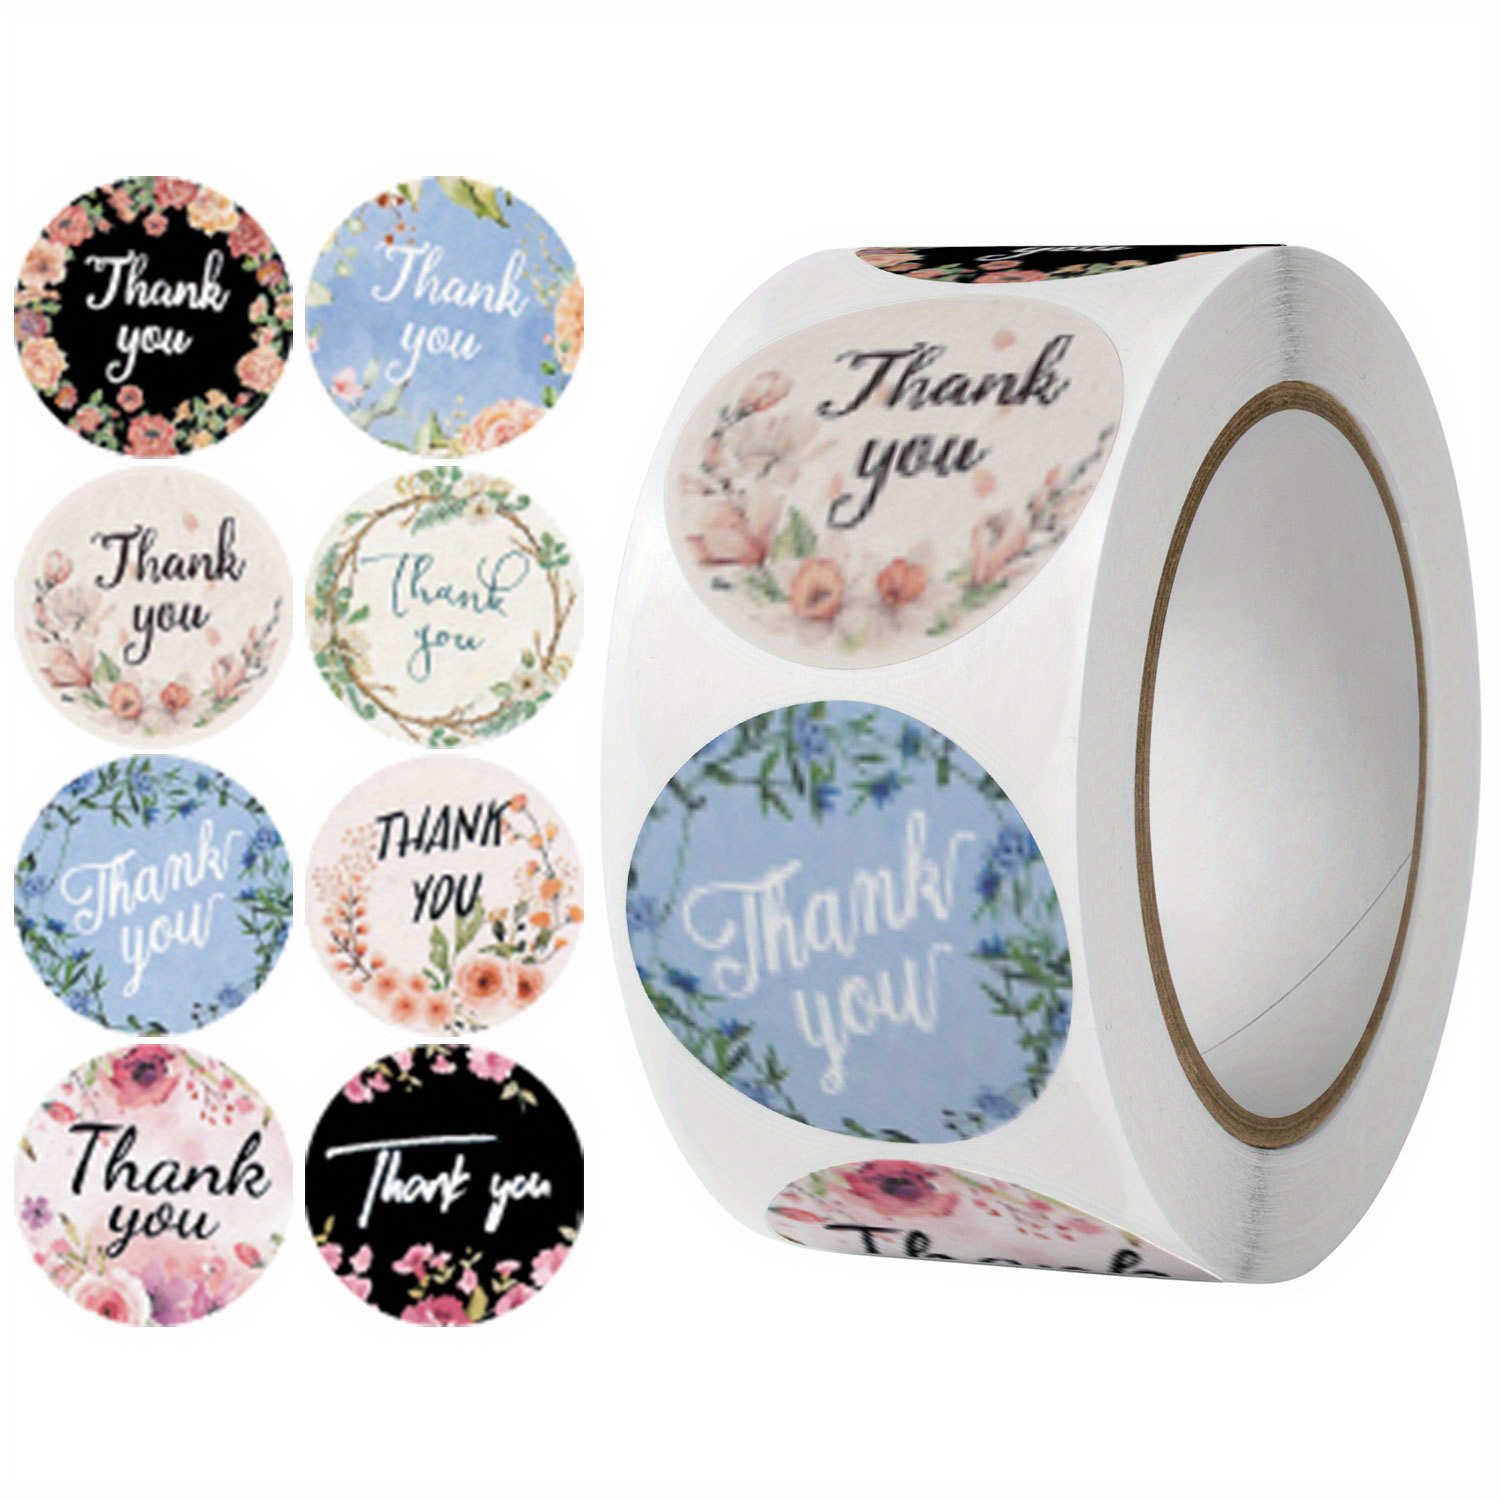 500pcs/roll Round Transparent Stickers Self-adhesive Clear Package Label  Gift Packaging Sealing Tag Wedding Decor Party Supplies - Stickers -  AliExpress